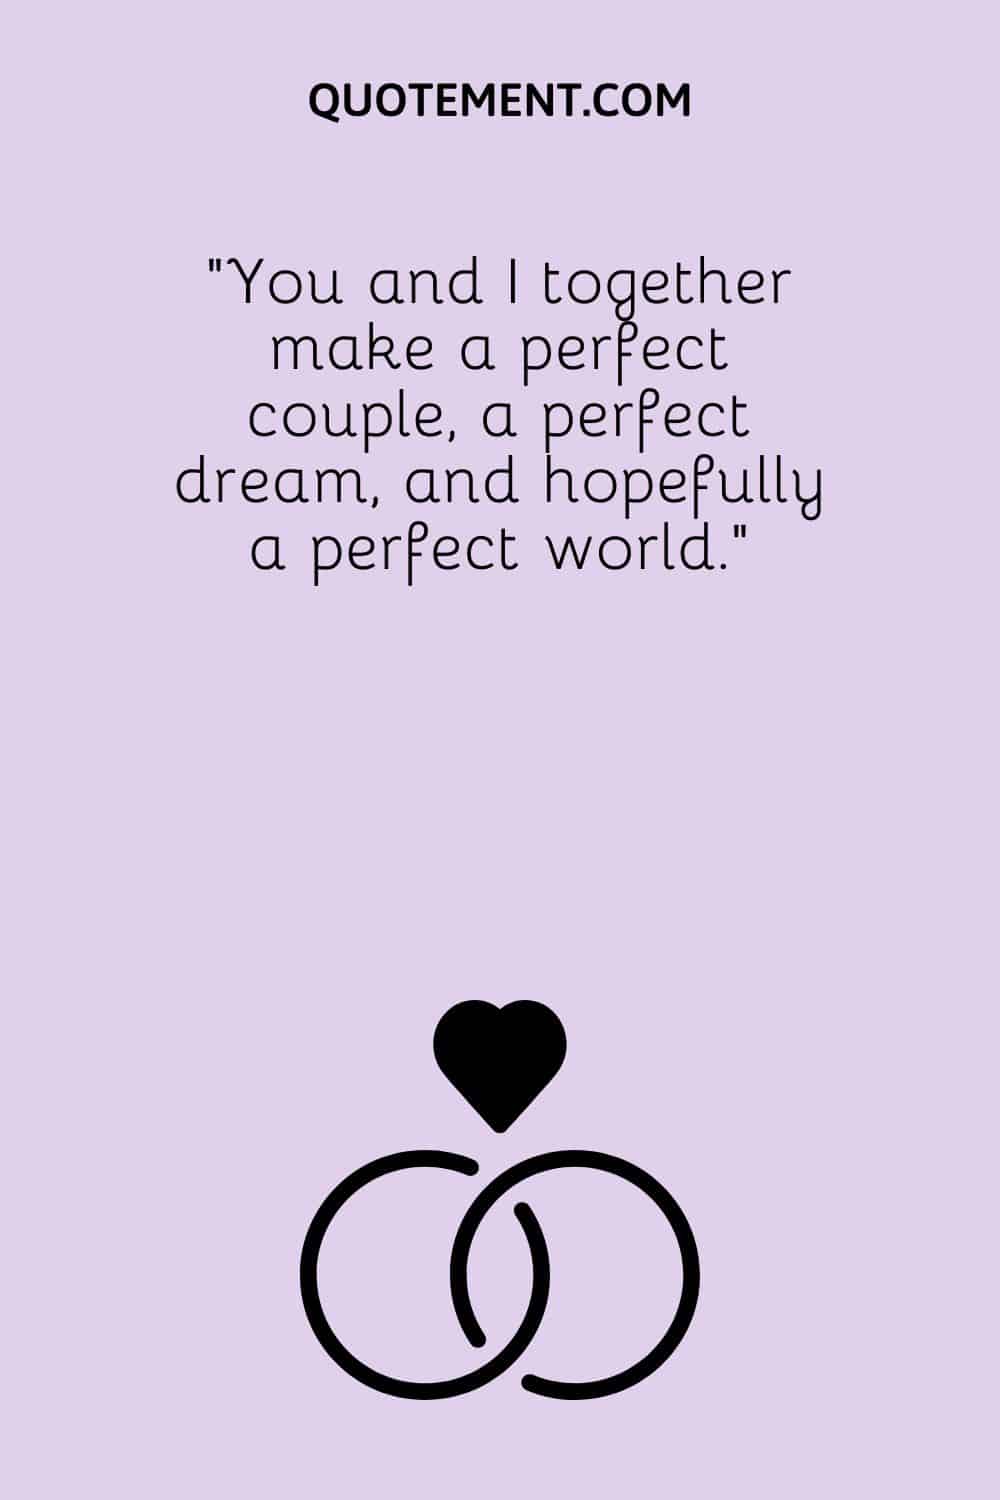 “You and I together make a perfect couple, a perfect dream, and hopefully a perfect world